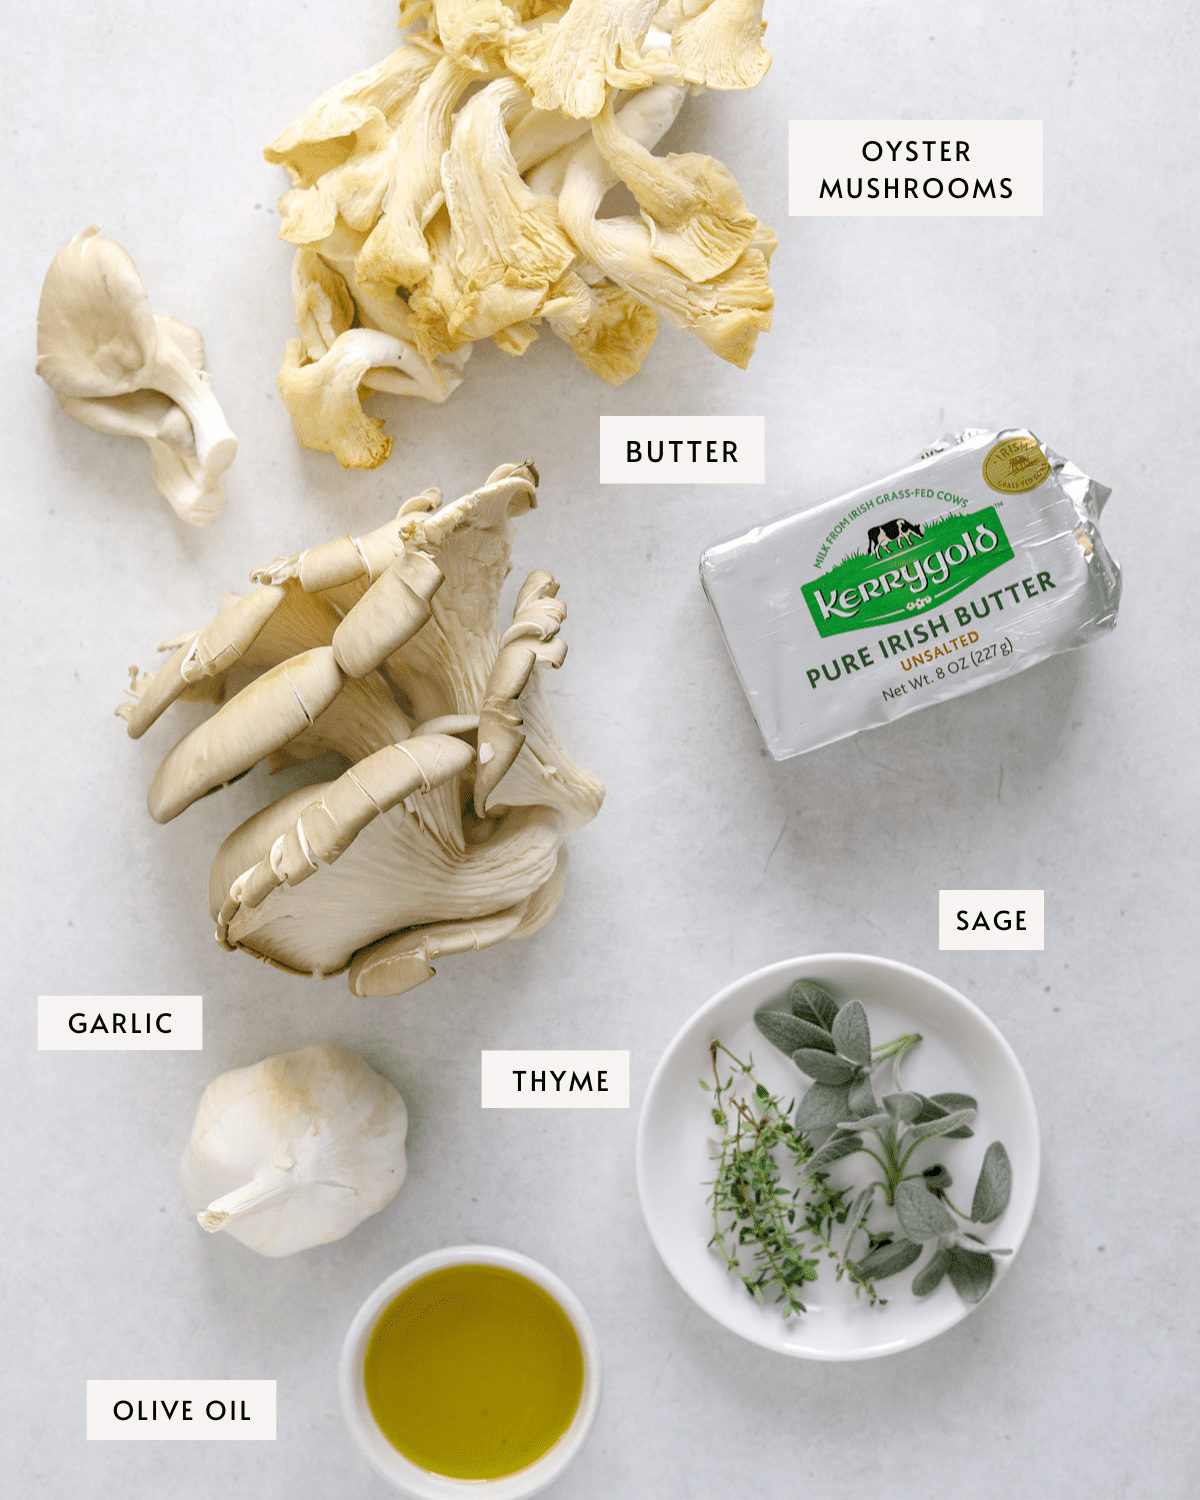 Two clusters of pale gray and light yellow oyster mushrooms, a pack of Irish butter, fresh sage and thyme leaves on a small white dish, a small bowl of olive oil and a bulb of garlic on a light blue/gray background.